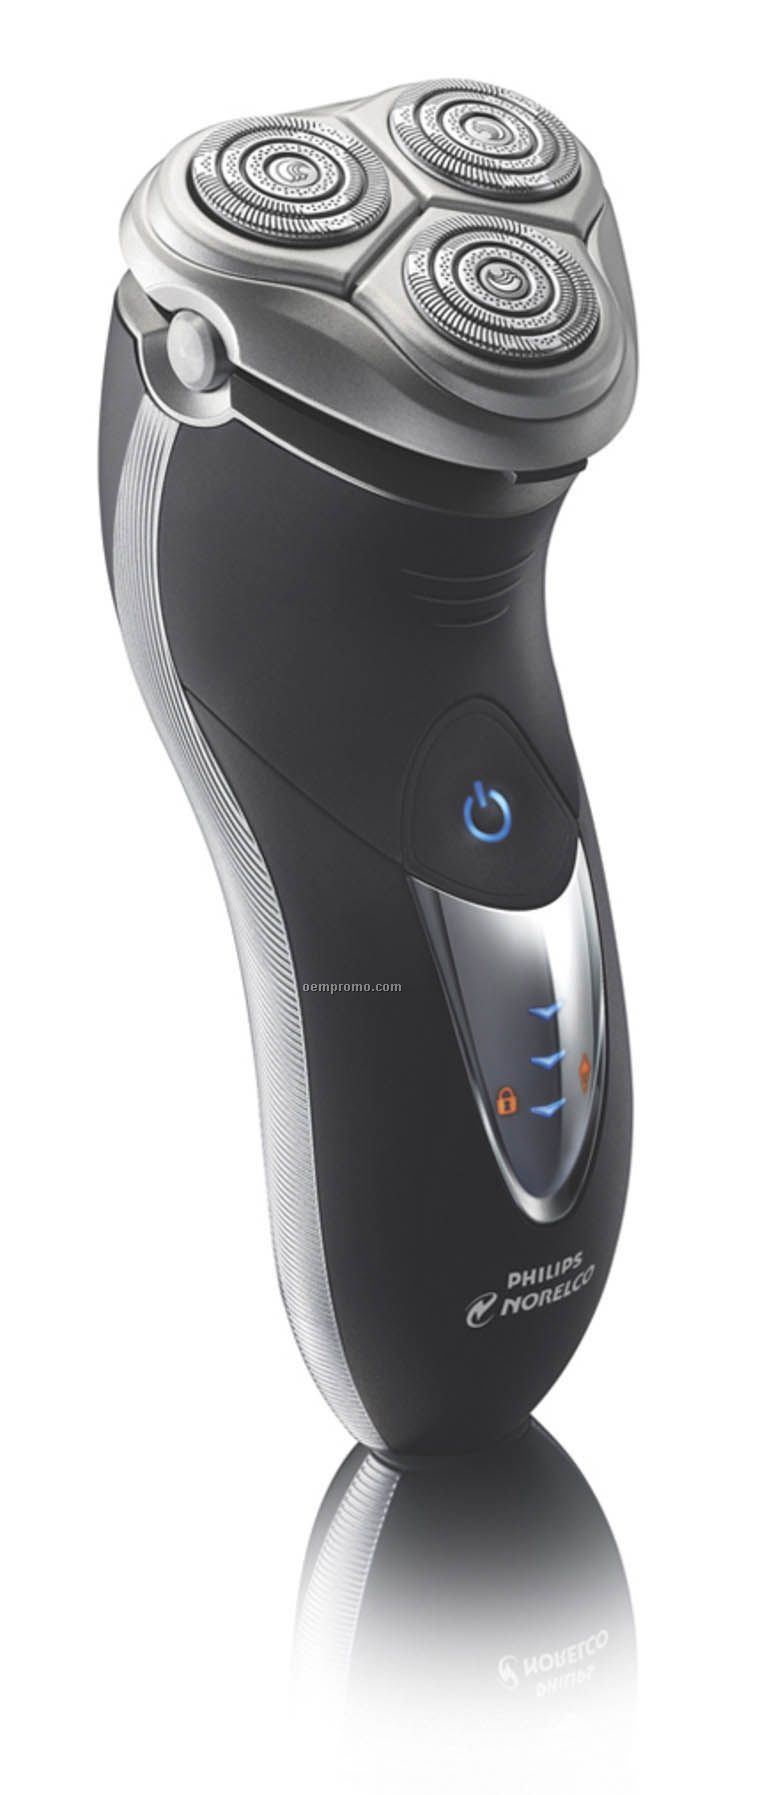 Phillips Norelco Speed Xl Cordless Men's Shaver W/ Jet Clean System